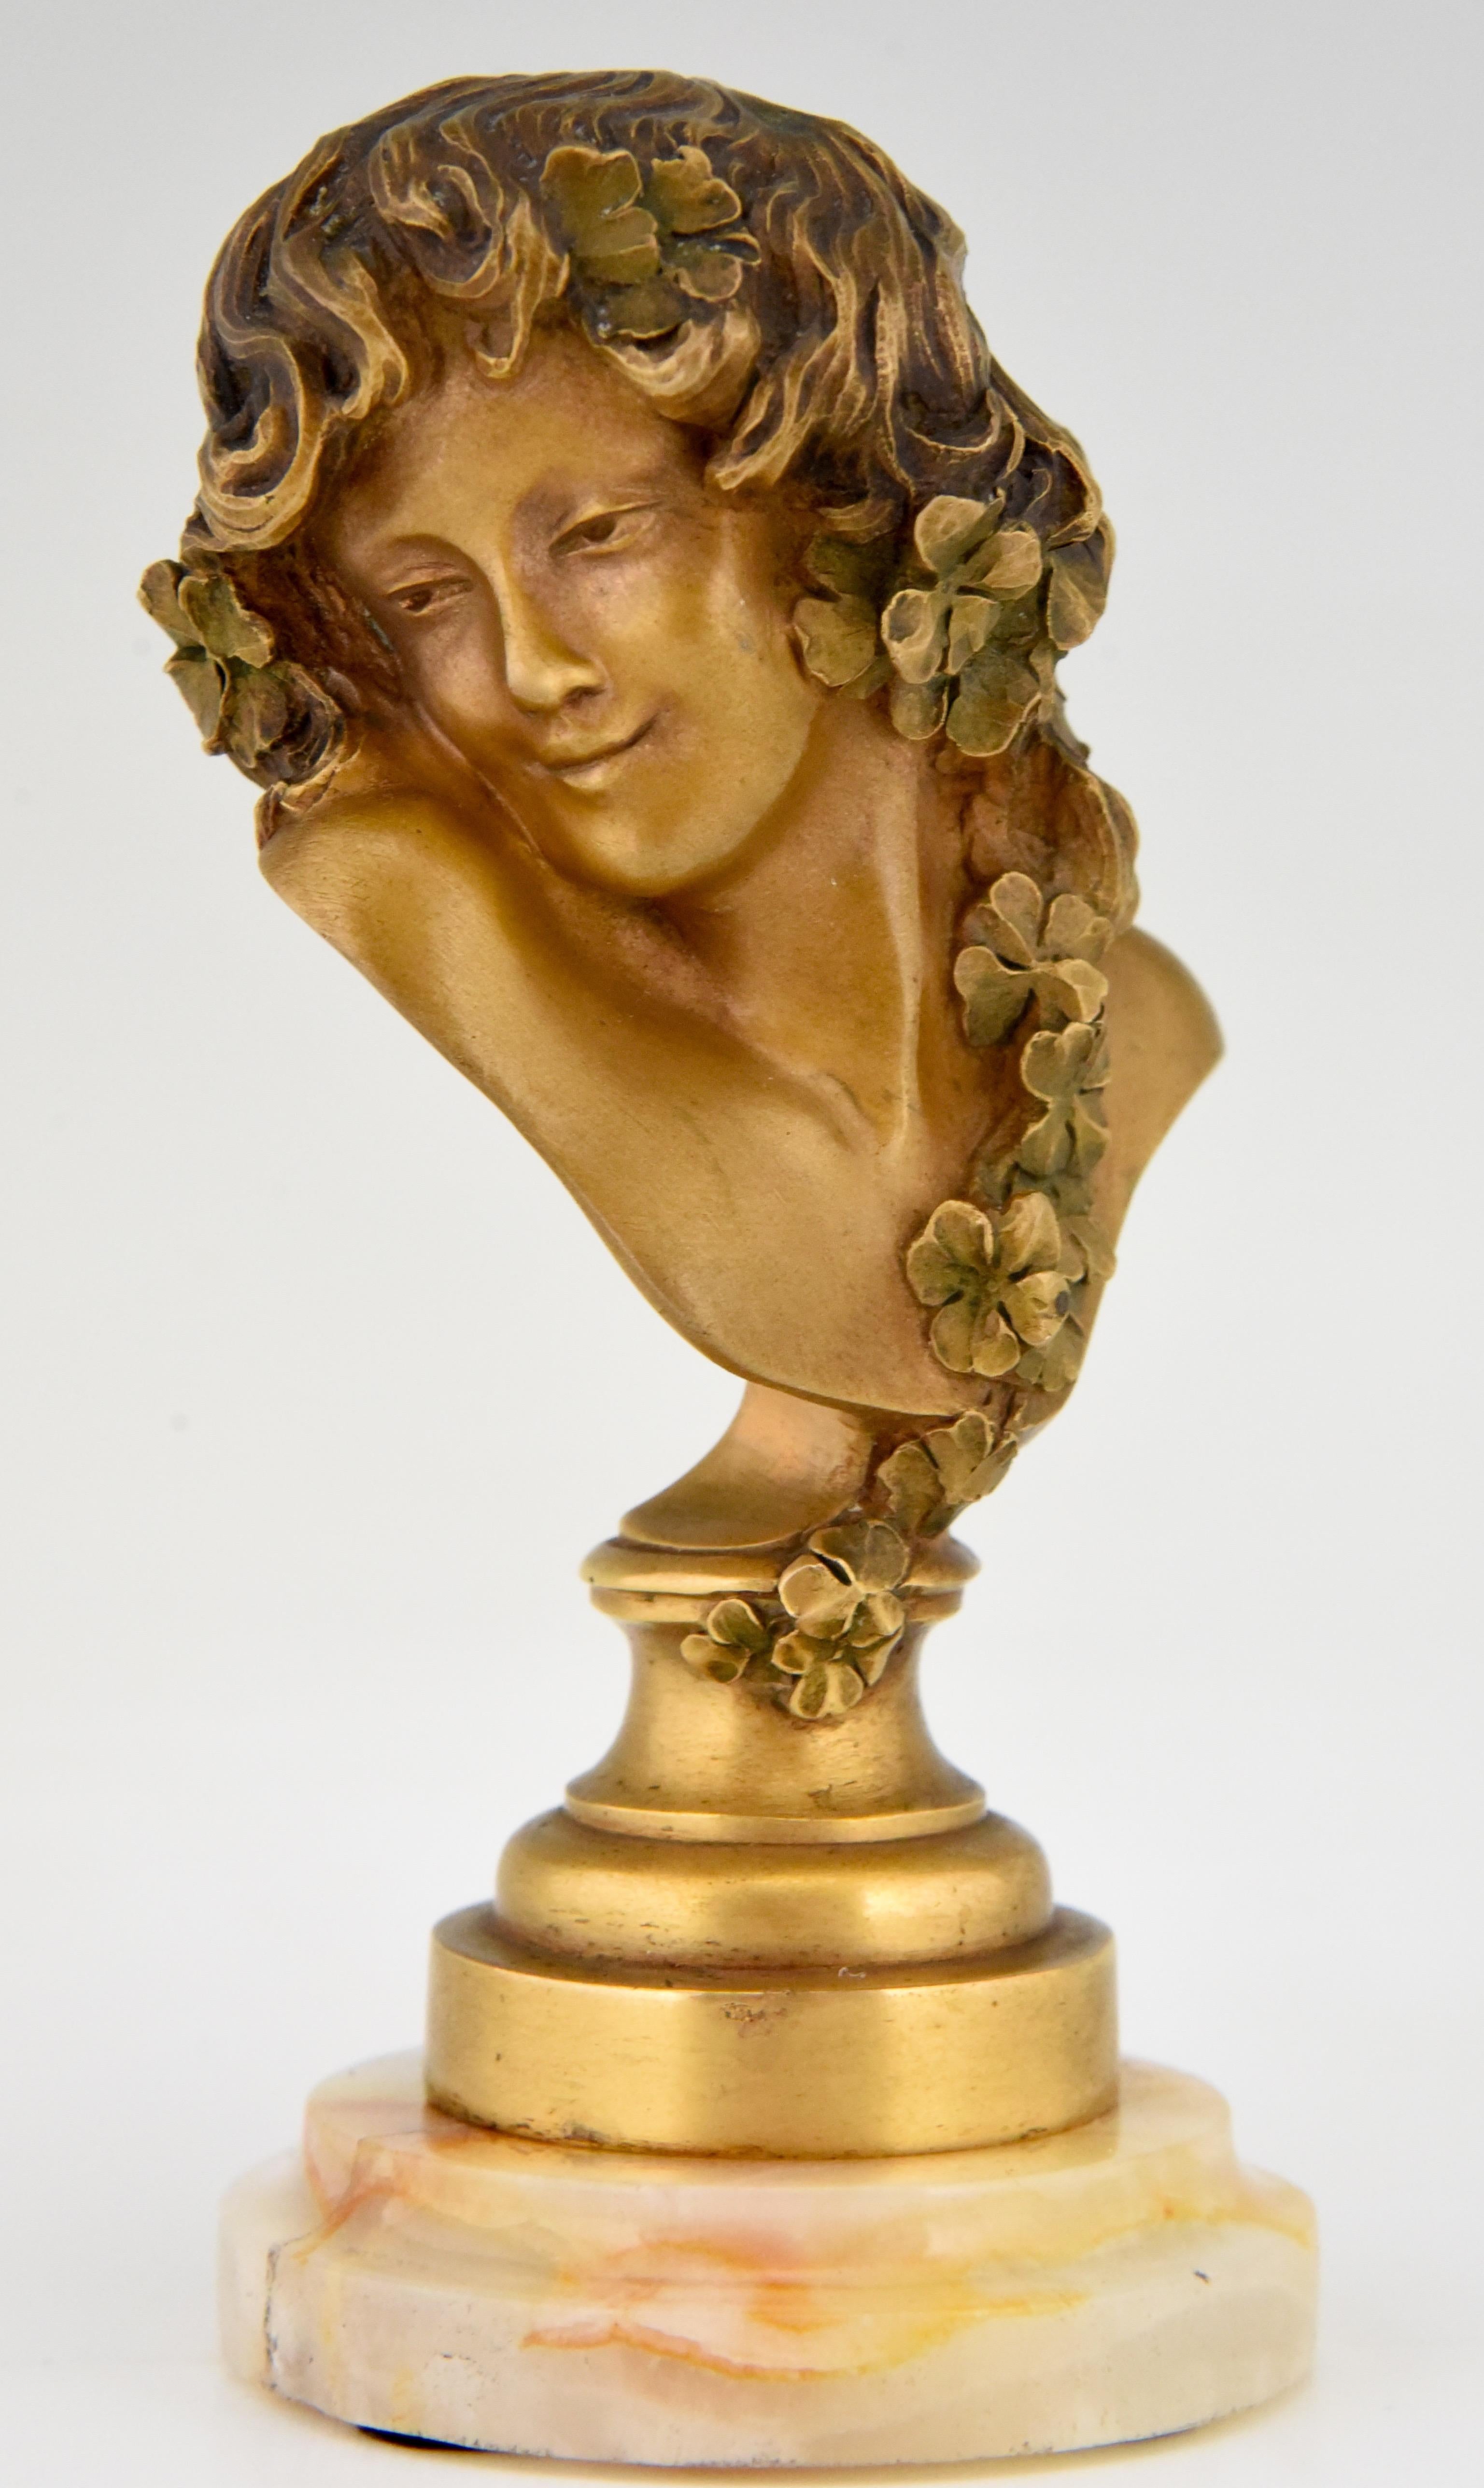 Art Nouveau bronze bust of a woman with flowers in her hair by the French artist Claire Jeanne Roberte Colinet. Signed and with foundry mark. The bronze has a lovely gilt patina and stands on a fine marble base.
Literature:
“Art Deco and other